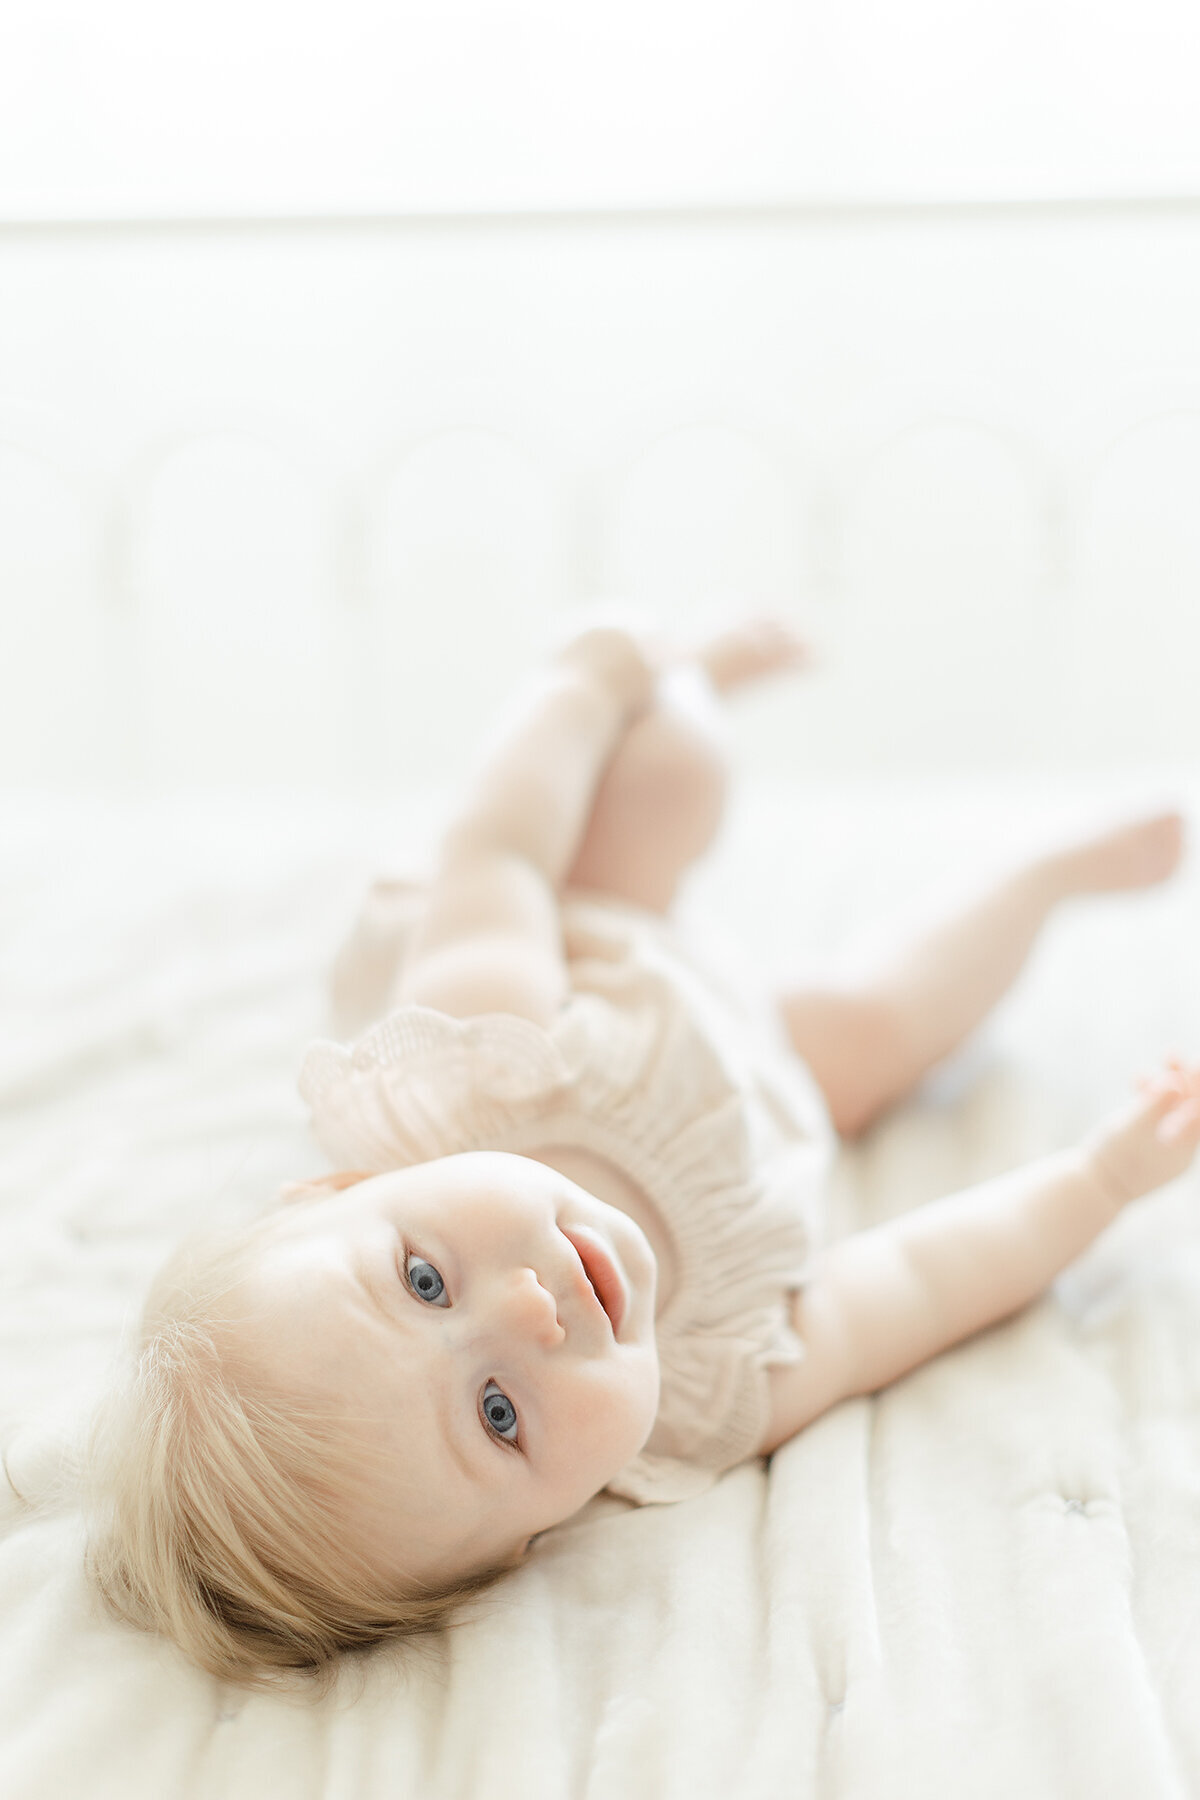 A baby girl rolling around on a bed at a DFW photography studio for her milestone portraits.